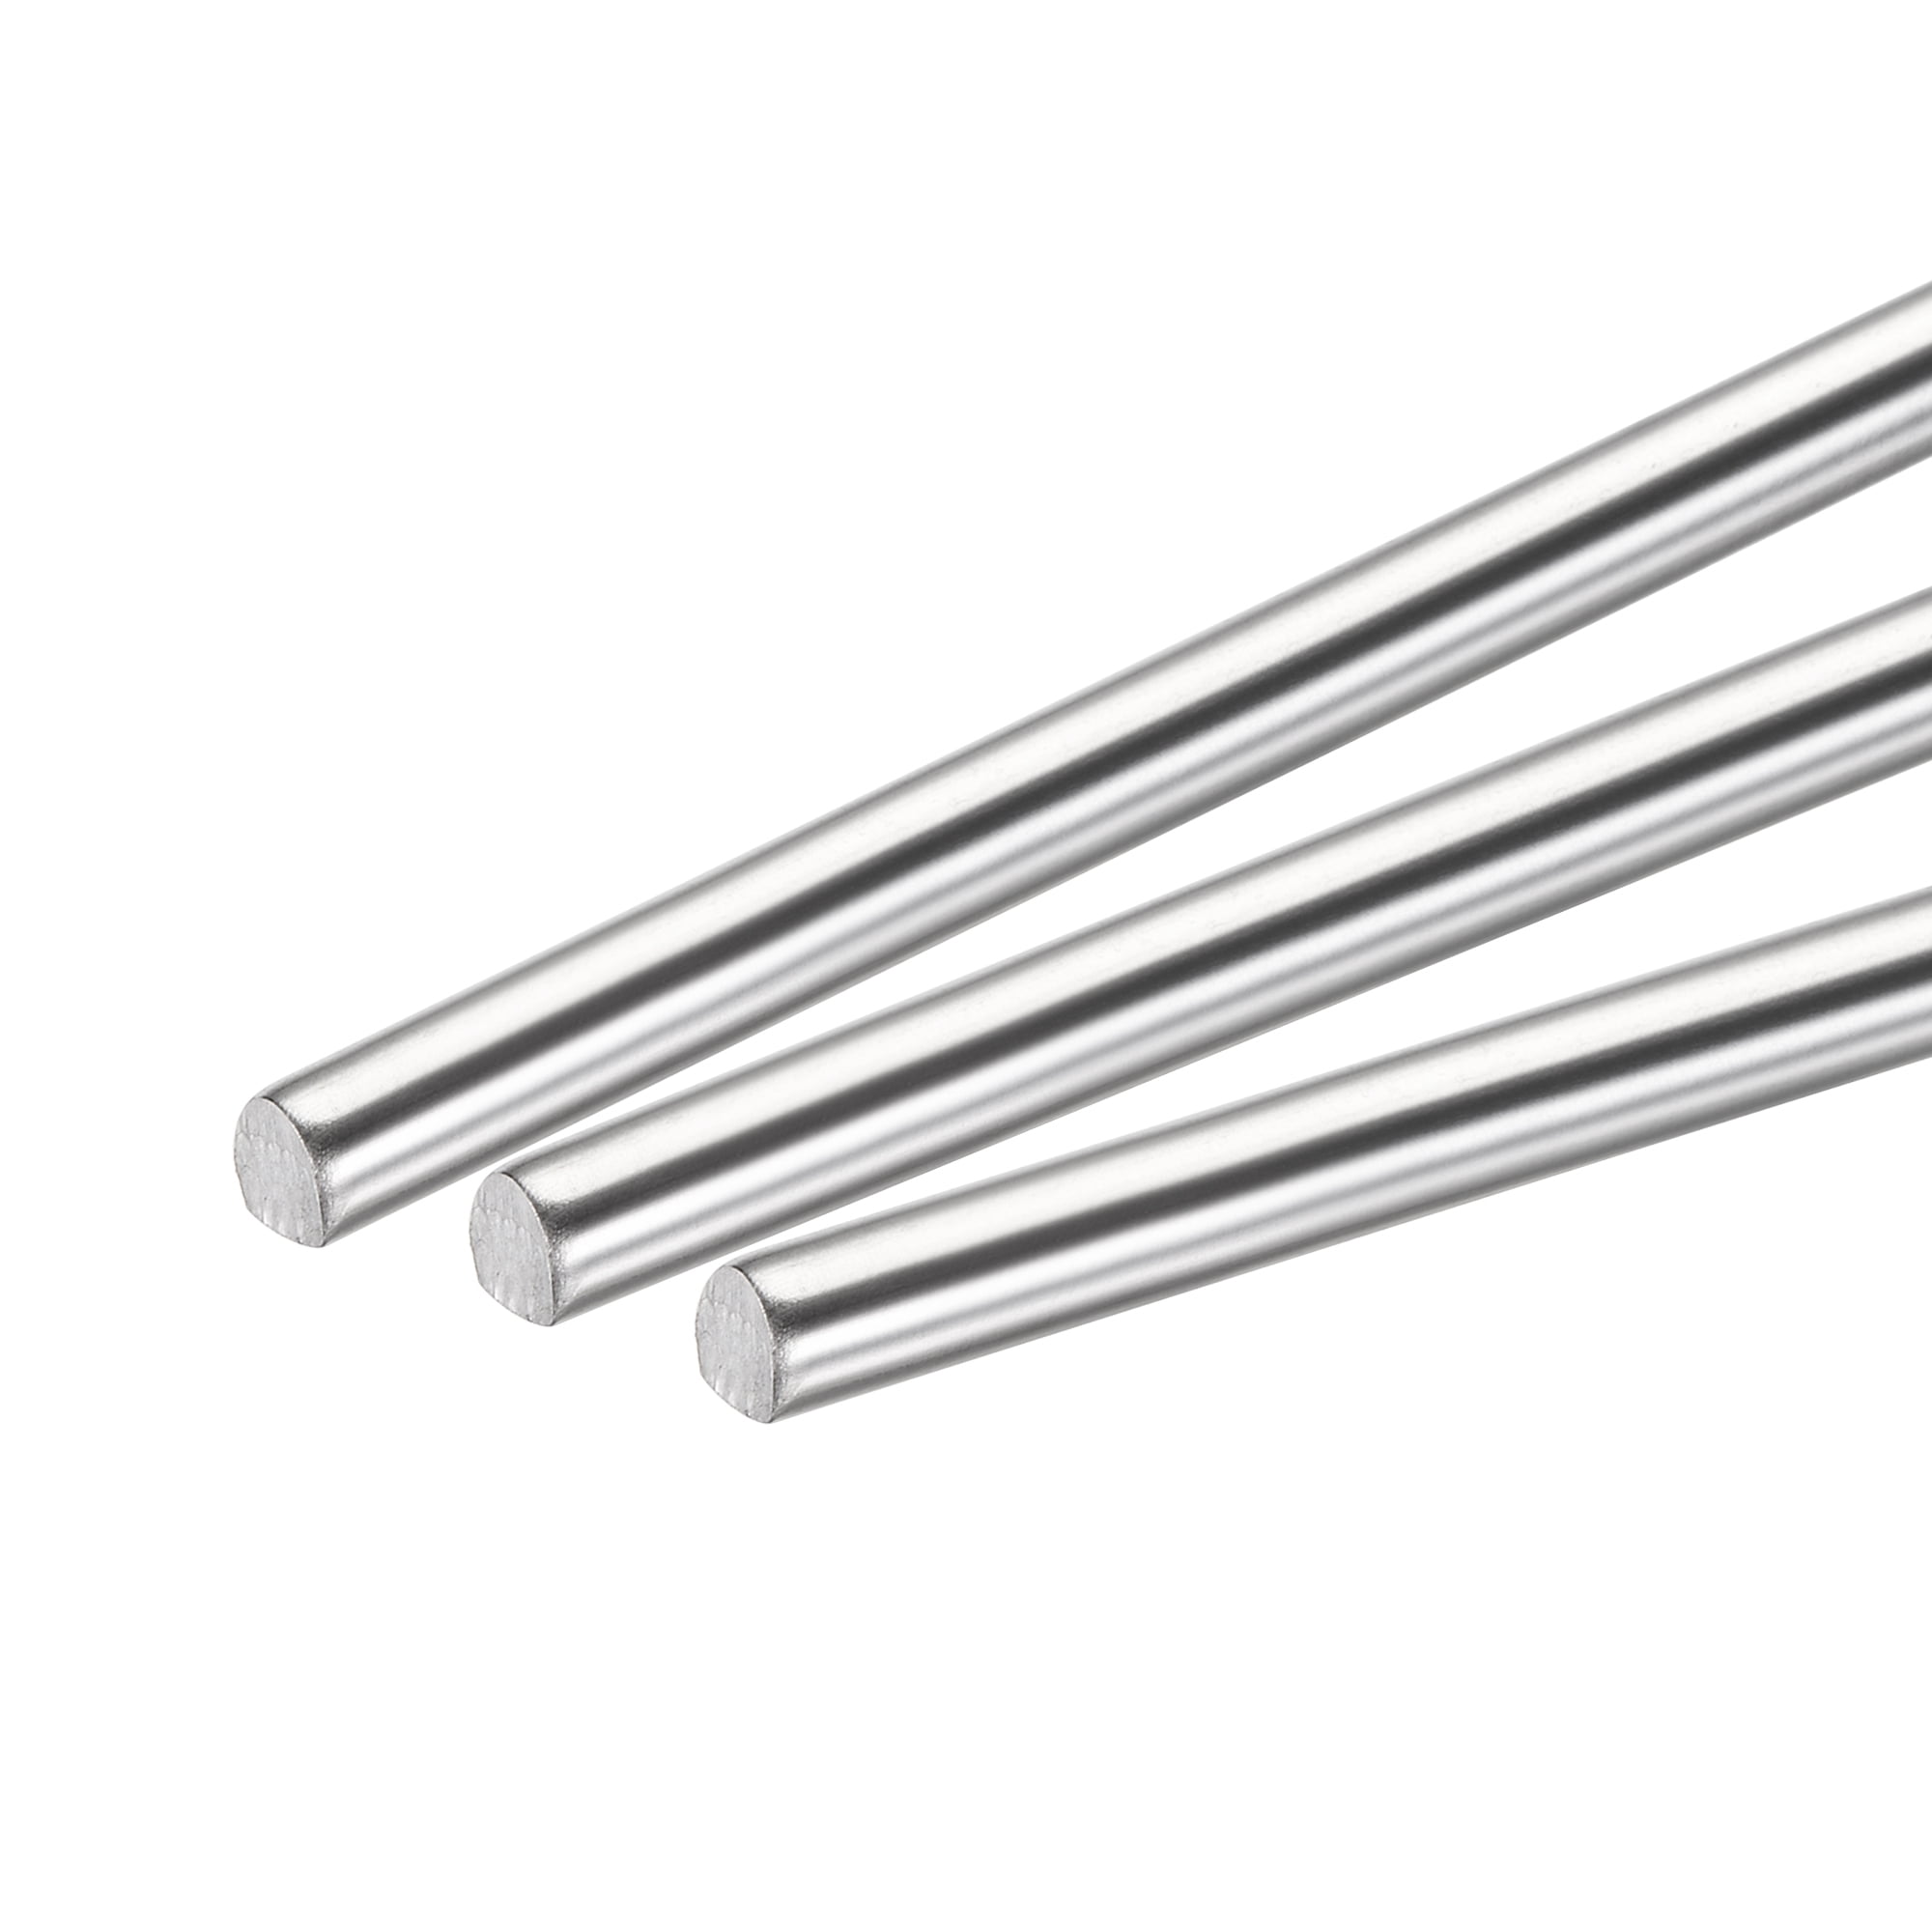 10pcs 3mm x 75mm 304 Stainless Steel Solid Round Rod for DIY Craft 